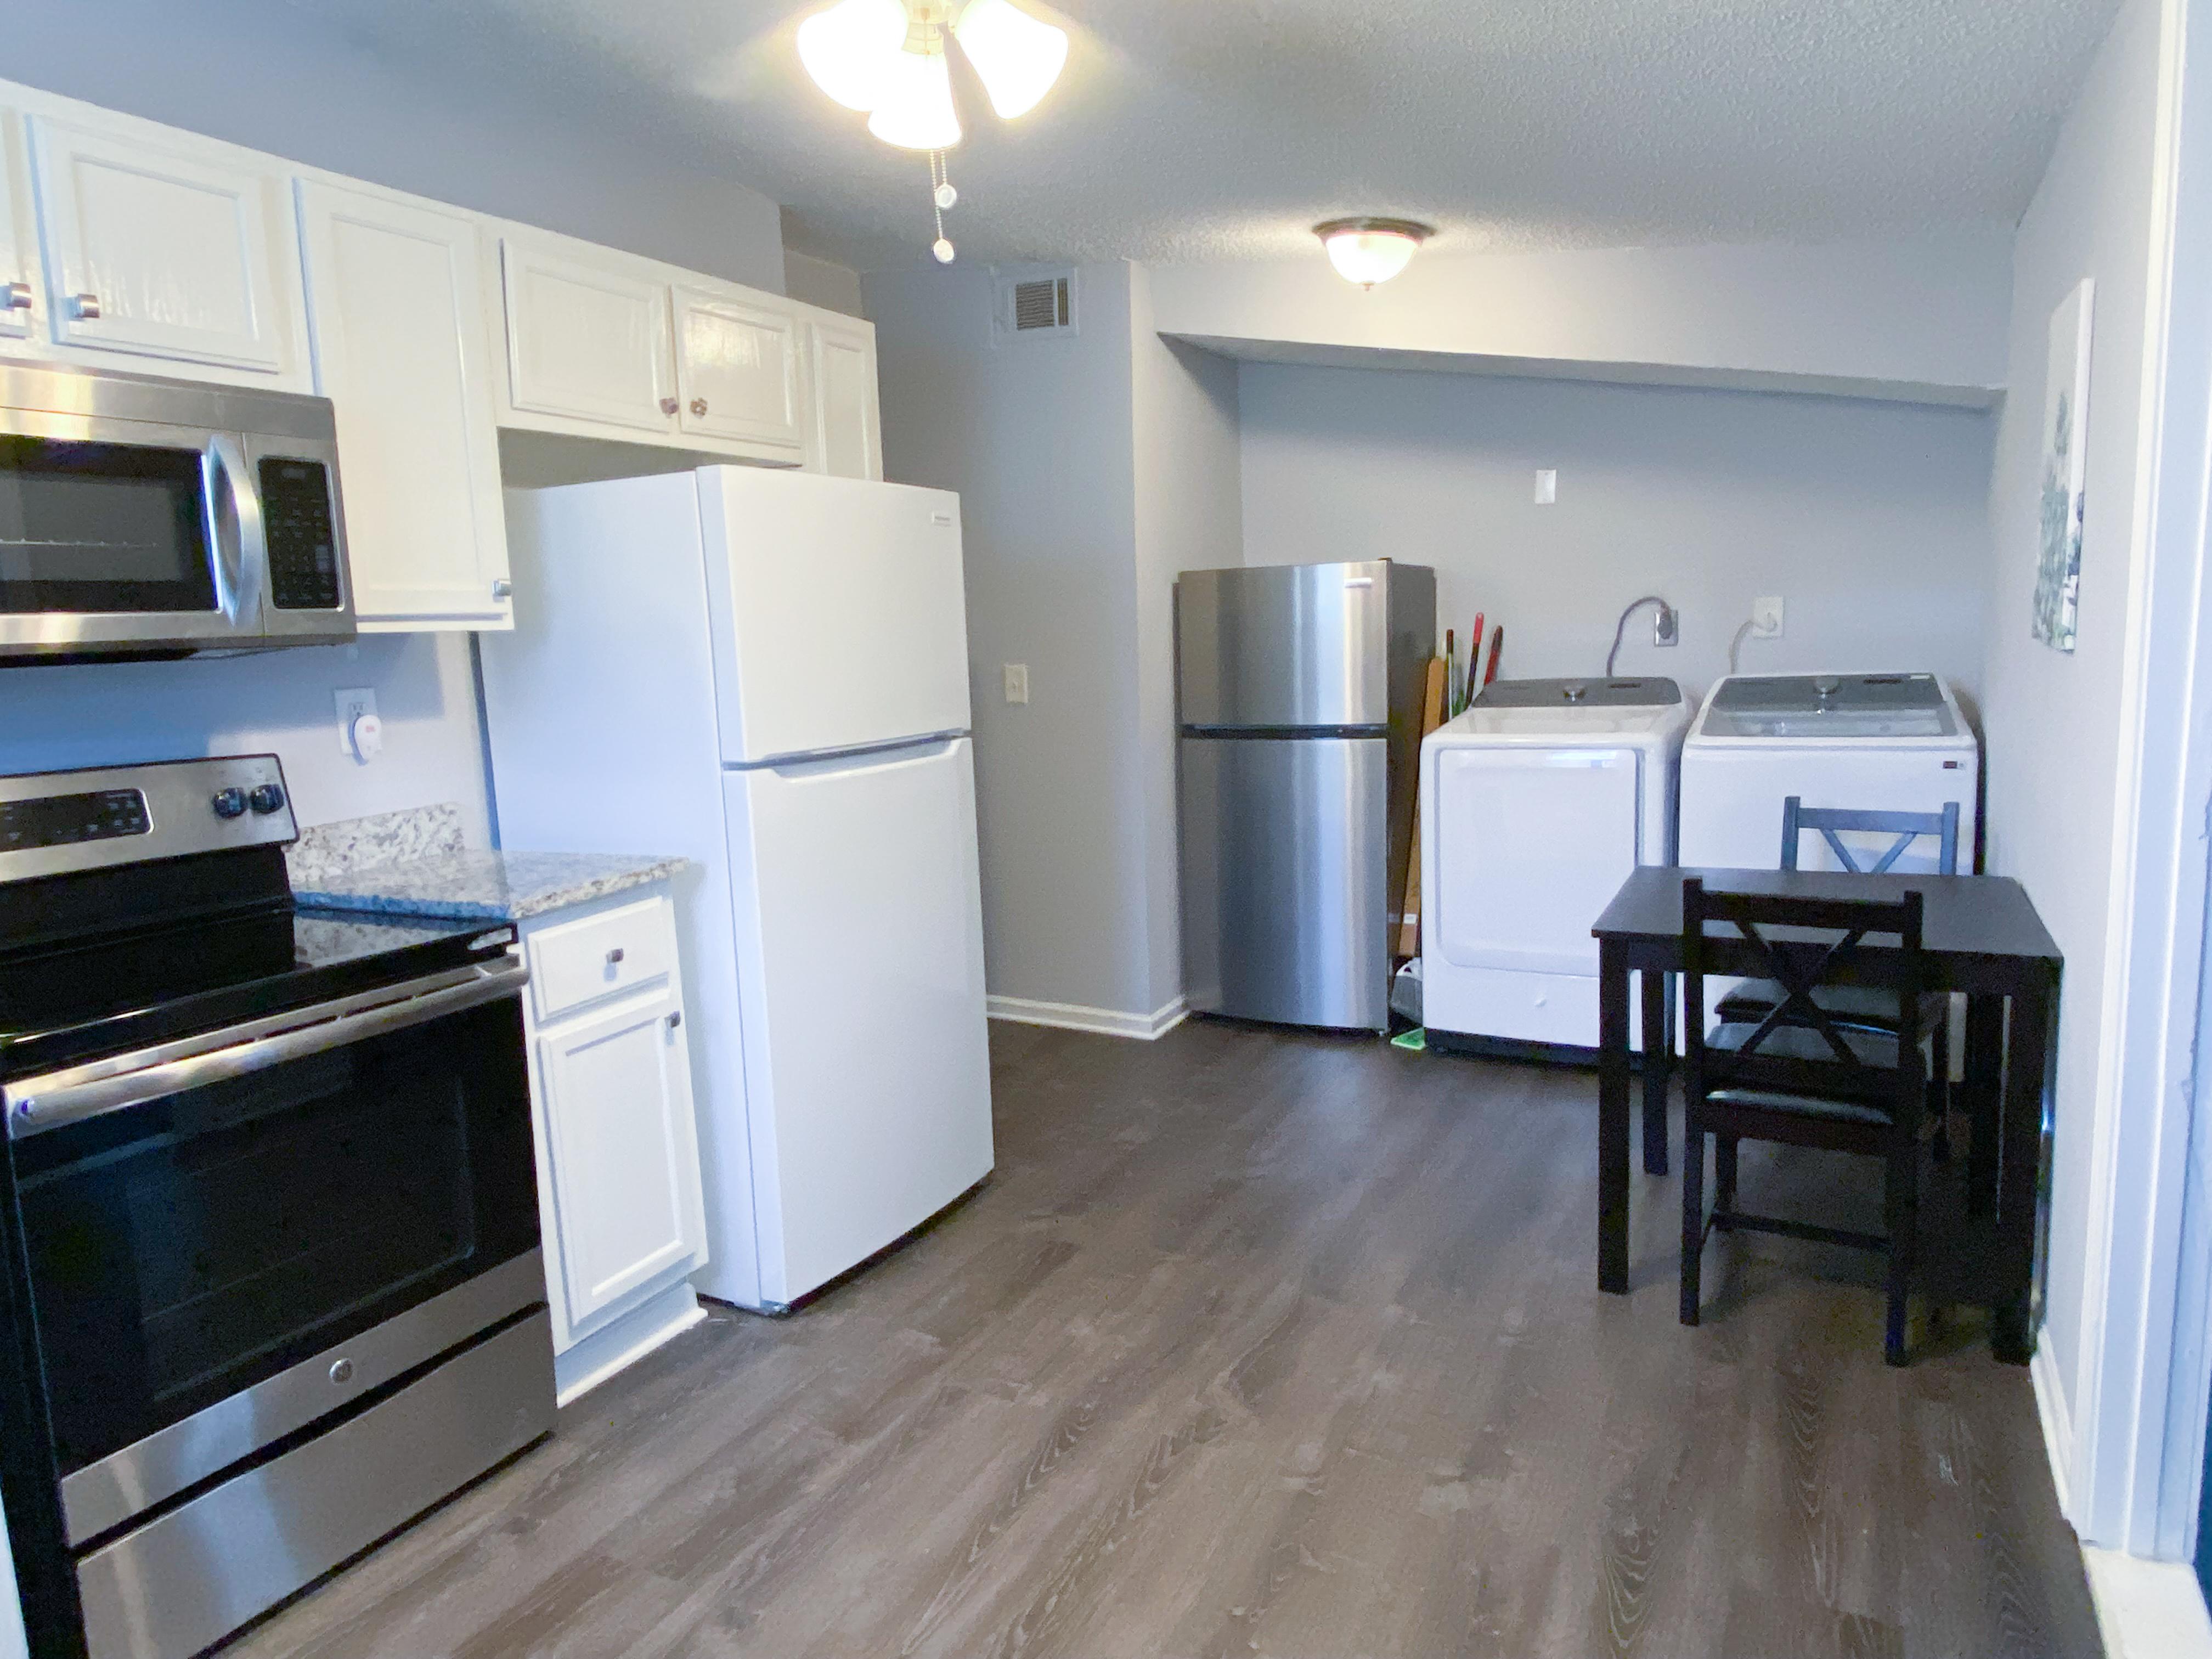 Shared Living Space with Dining Table, x2 Fridge, and Communal Washer/Dryer